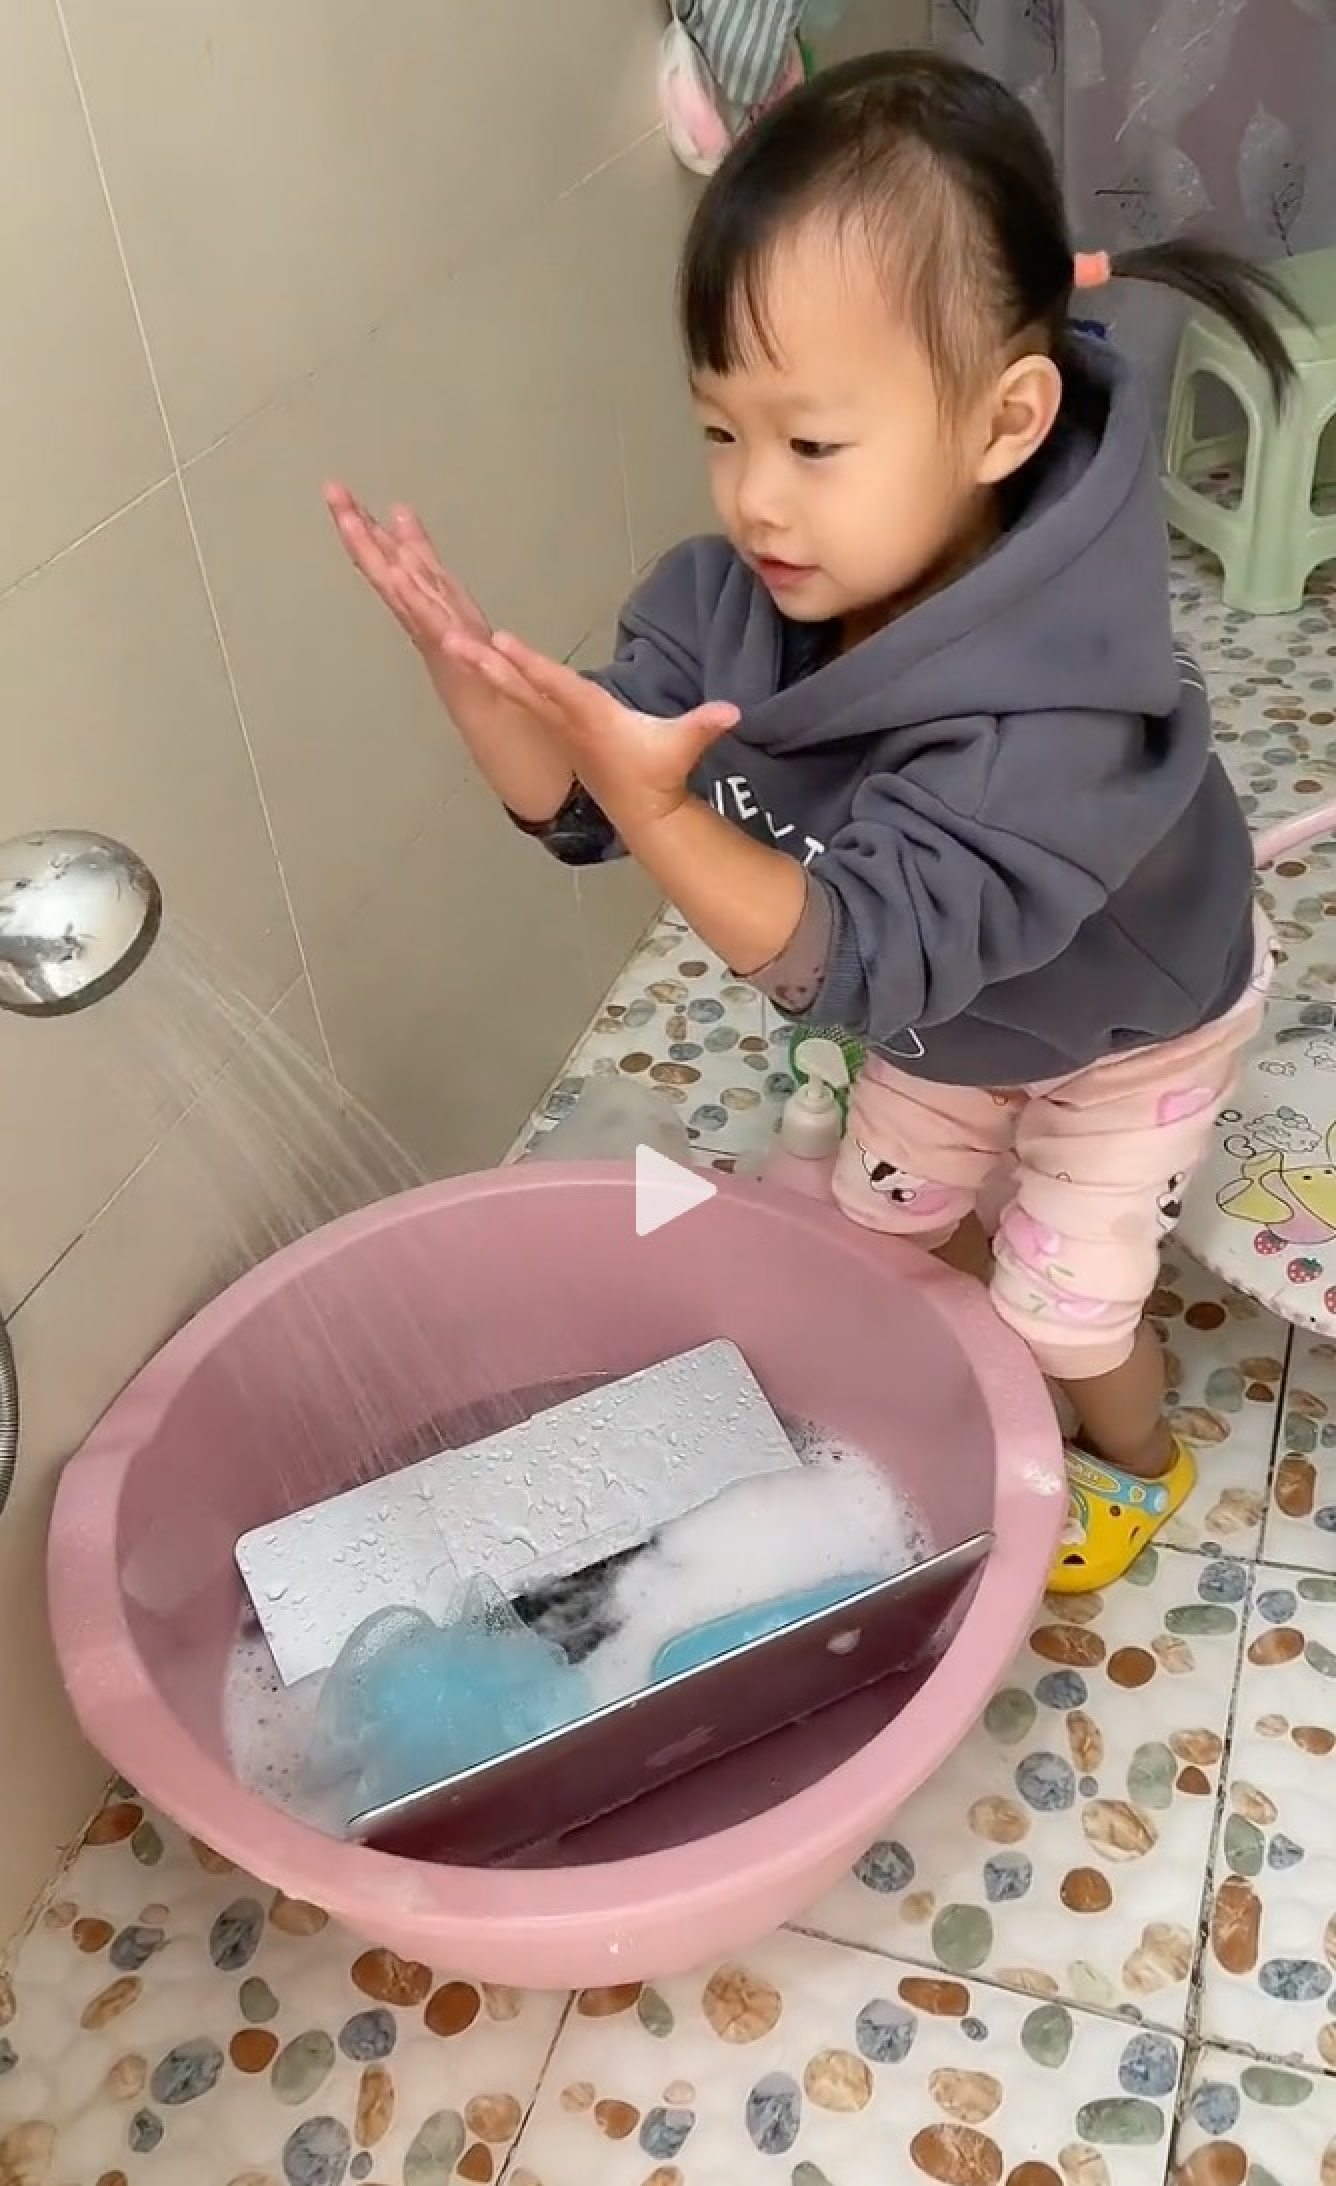 The 2-year-old overheard her dad’s complaints and while he was asleep and later that day she ‘washed’ his US$1,200 laptop for him as a favour. Photo: Douyin